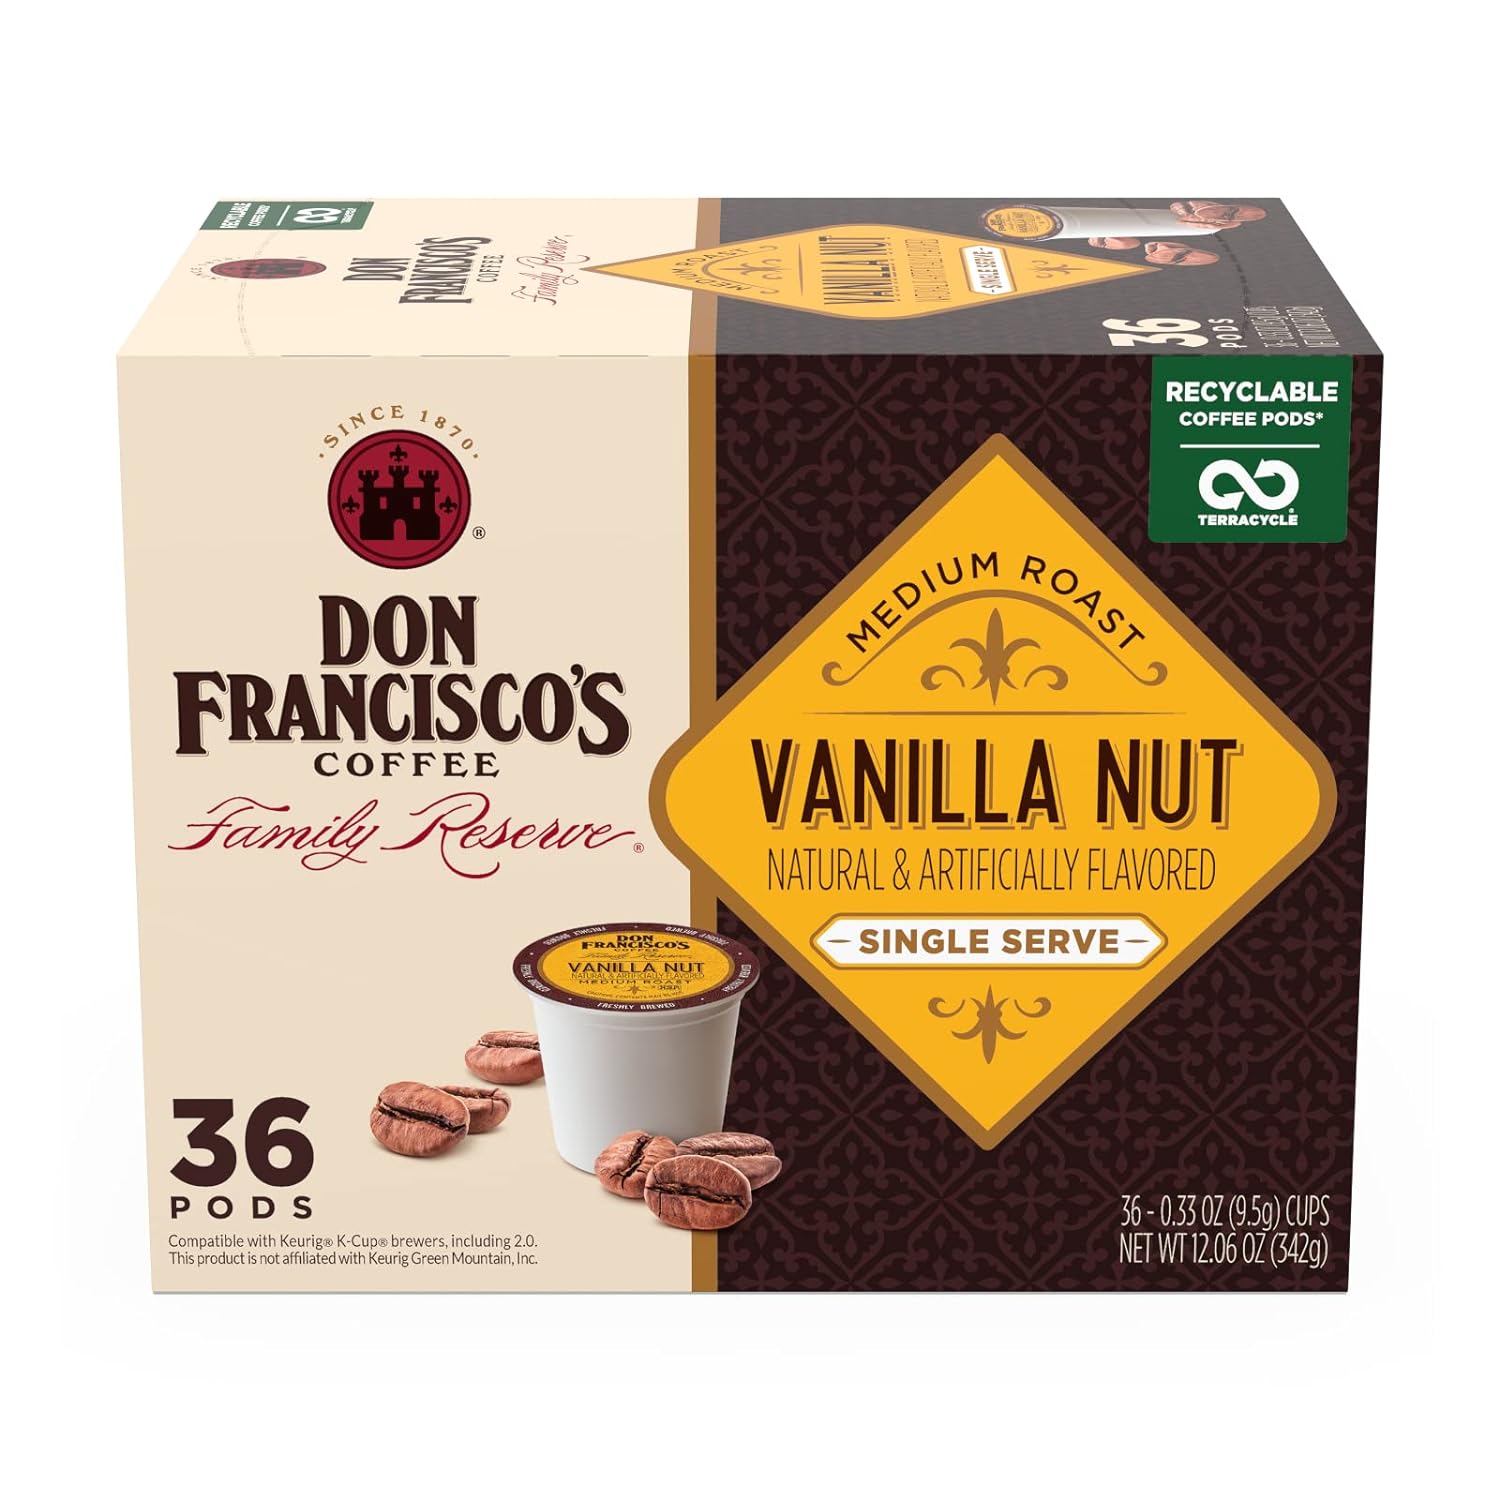 Don Francisco's Vanilla Nut Flavored Medium Roast Coffee Pods - 36 Count - Recyclable Single-Serve Coffee Pods, Compatible with your K-Cup Keurig Coffee Maker (Including 2.0)